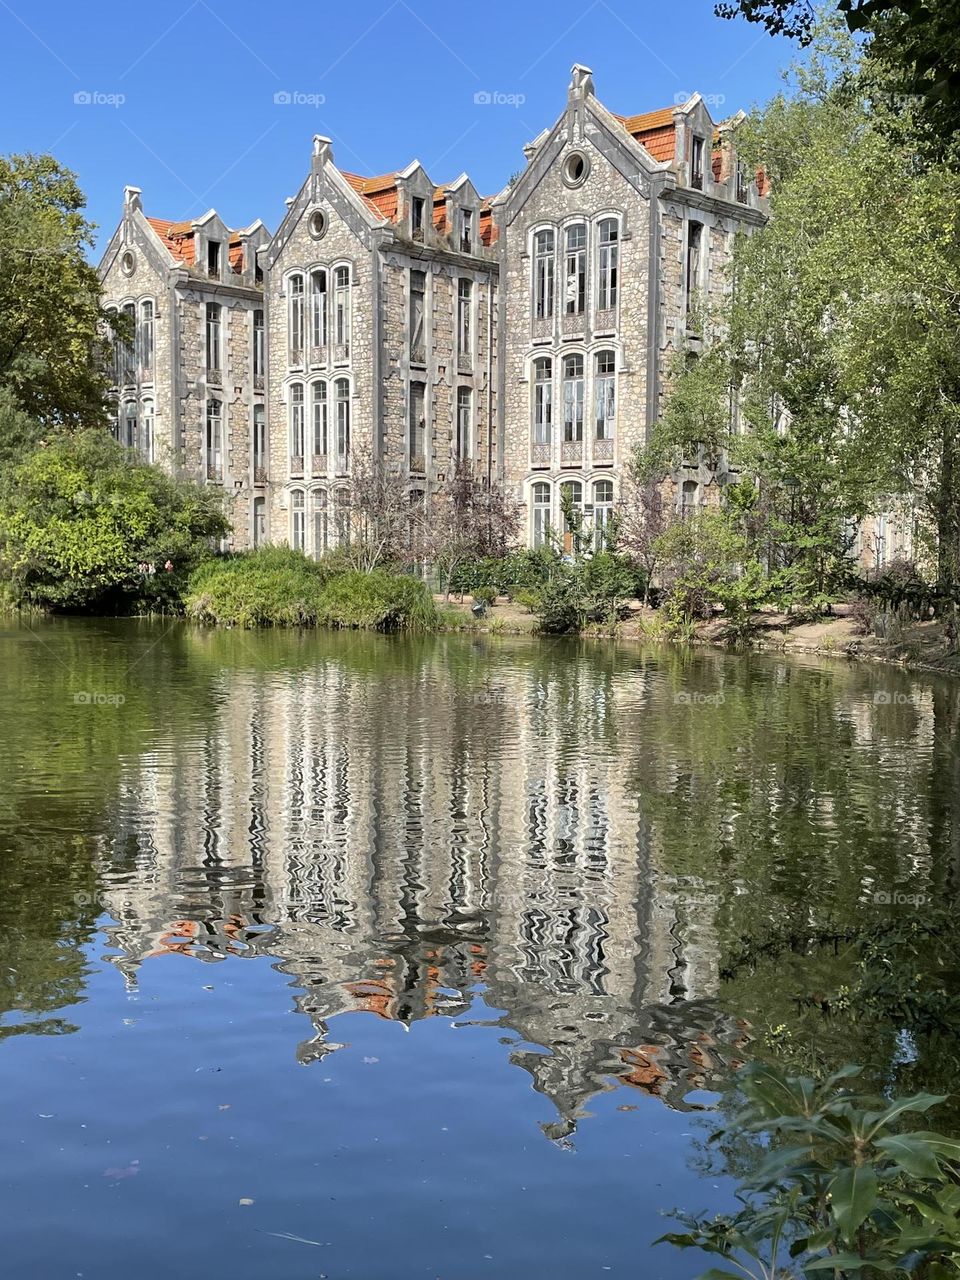 Architecture, The lake’s Old Buildings 